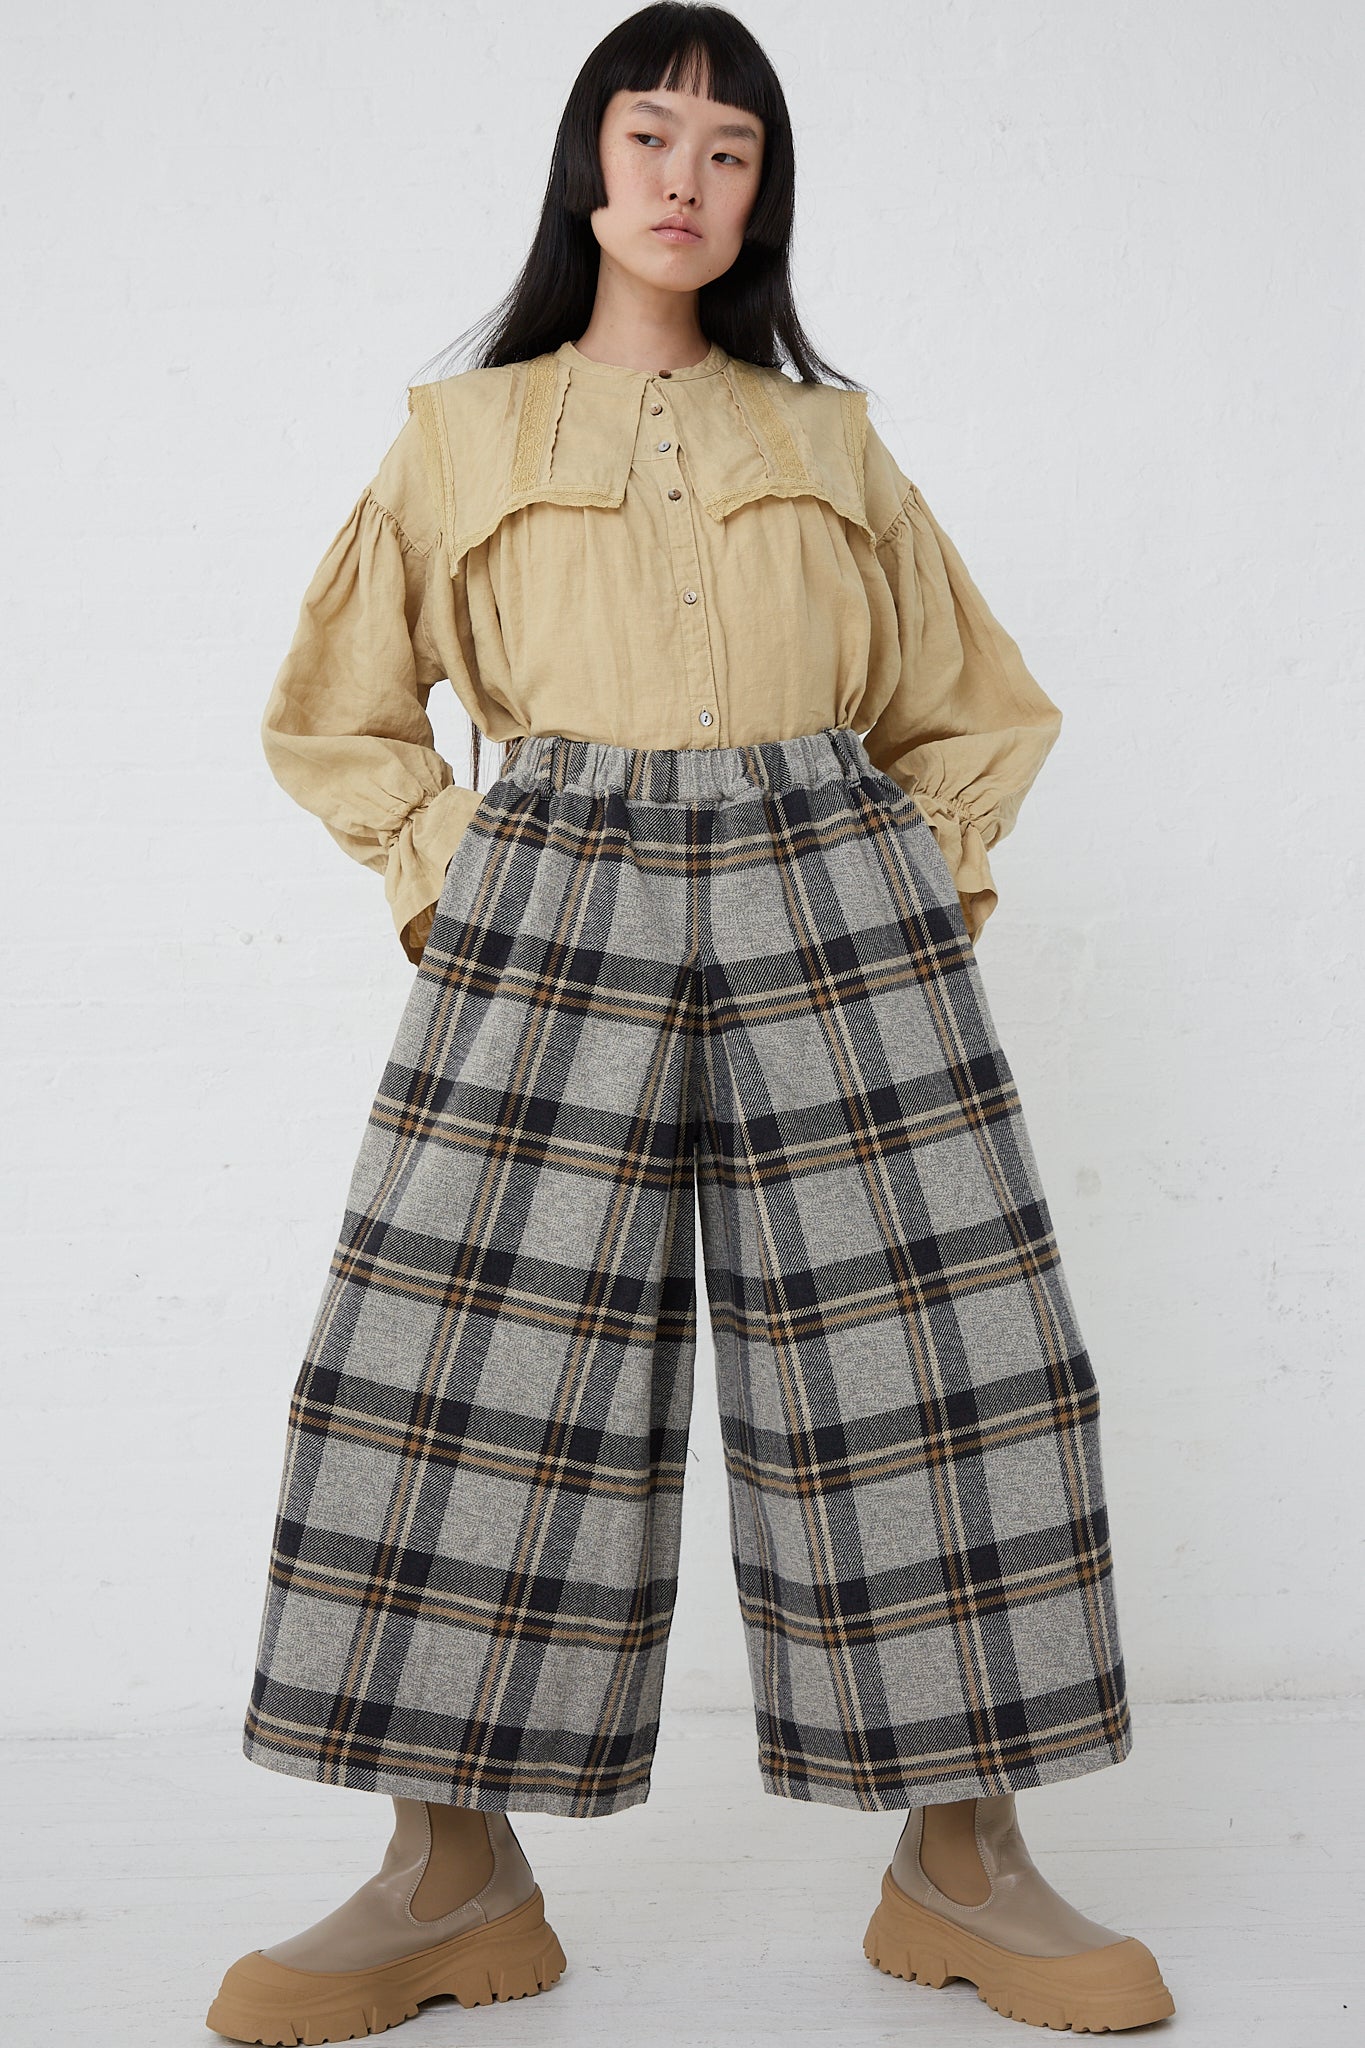 The model is wearing Cotton Heavy Twill Plaid Wide Leg Pants in Navy made by nest Robe.